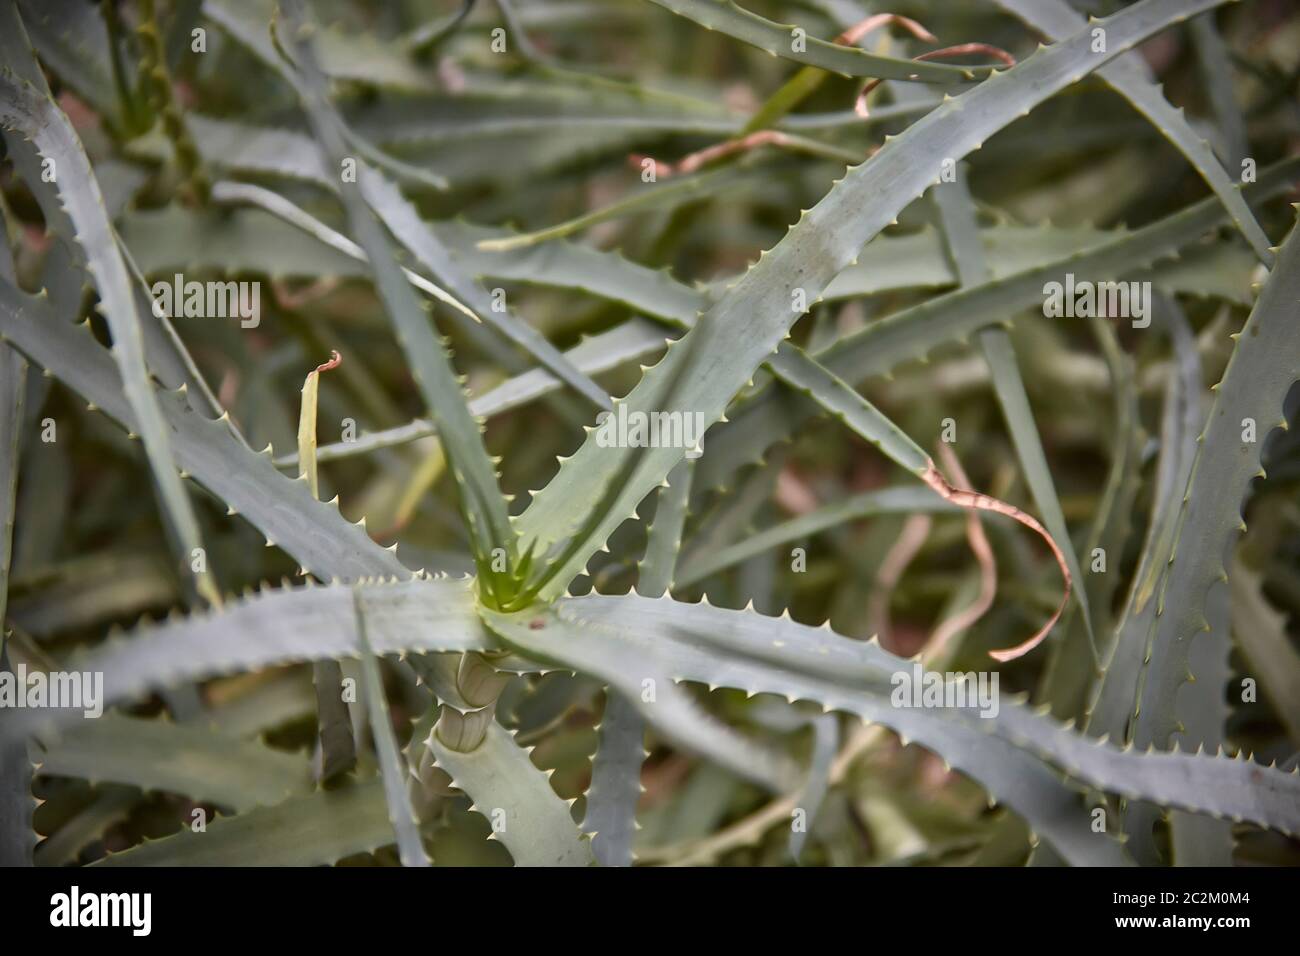 Detail of some parts of the aloe plant: exotic plant used for the care and well-being of man. Stock Photo